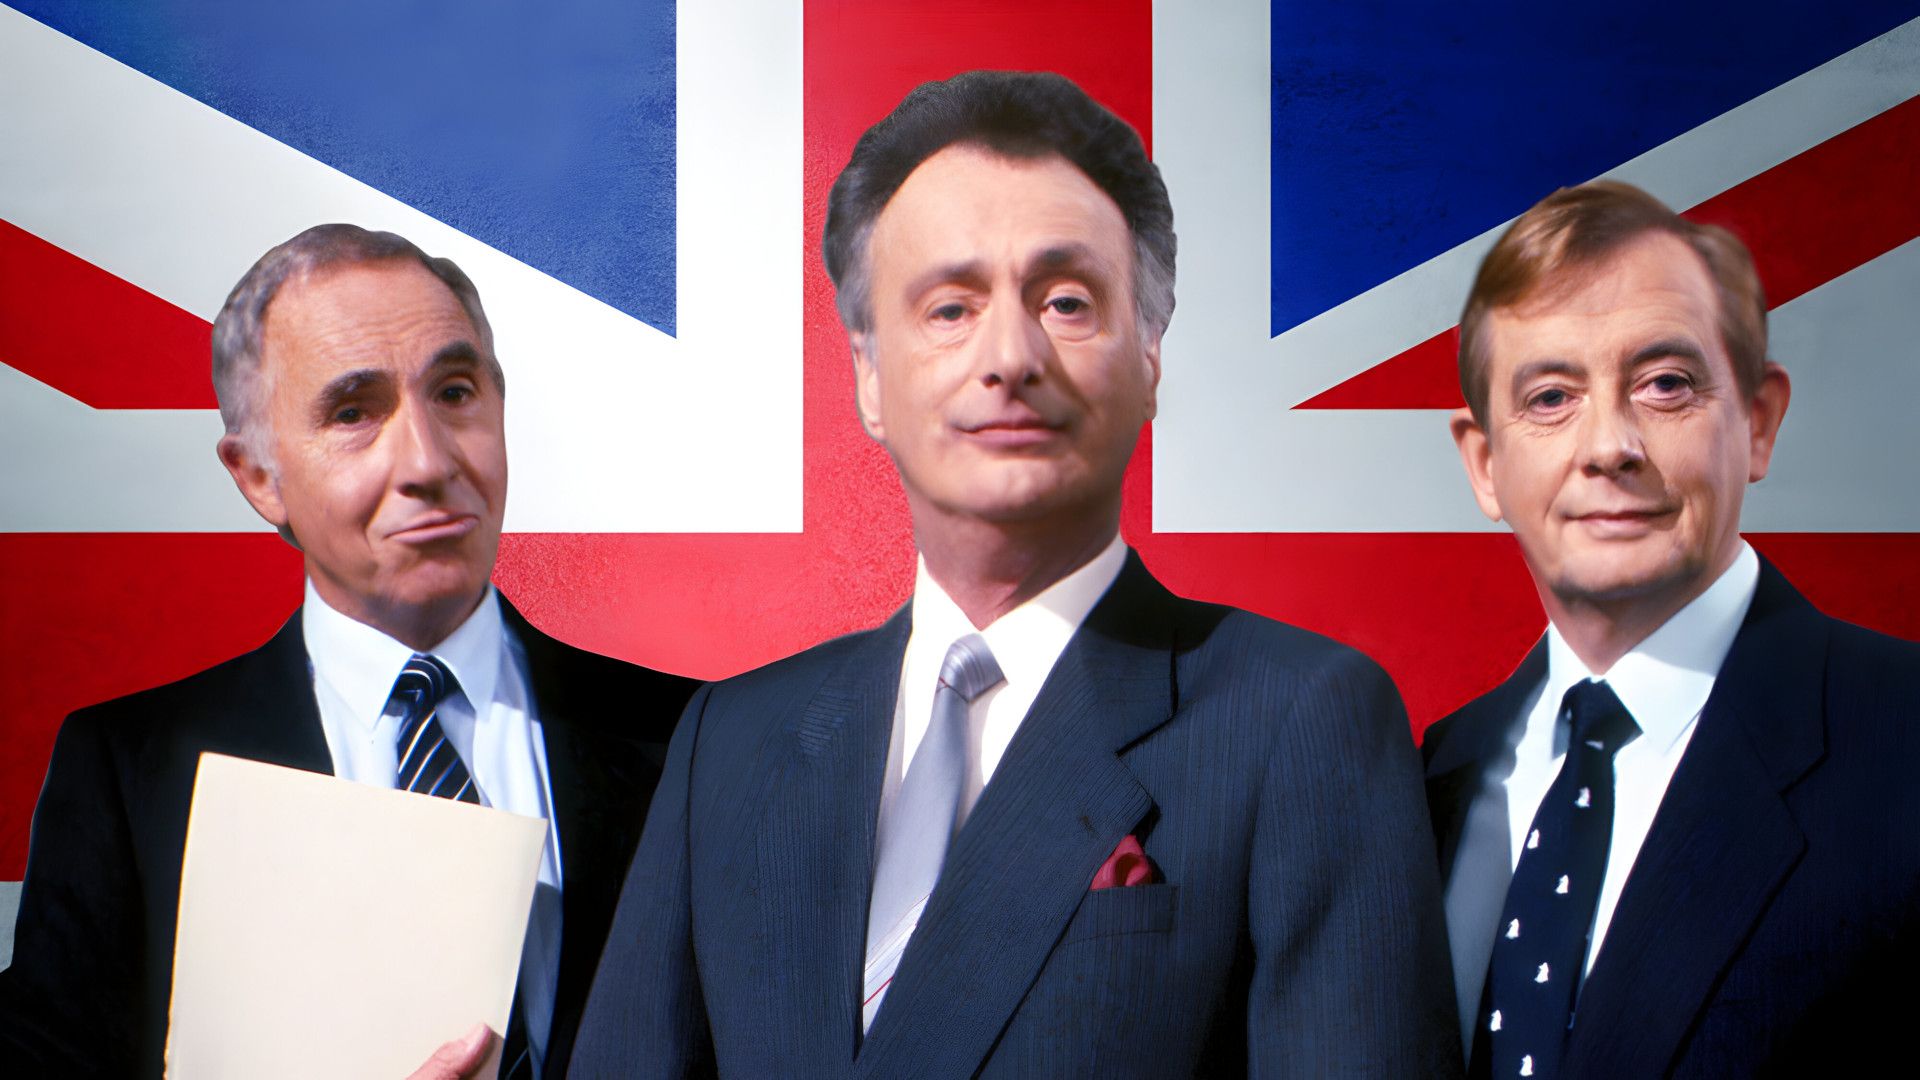 Yes, Prime Minister background